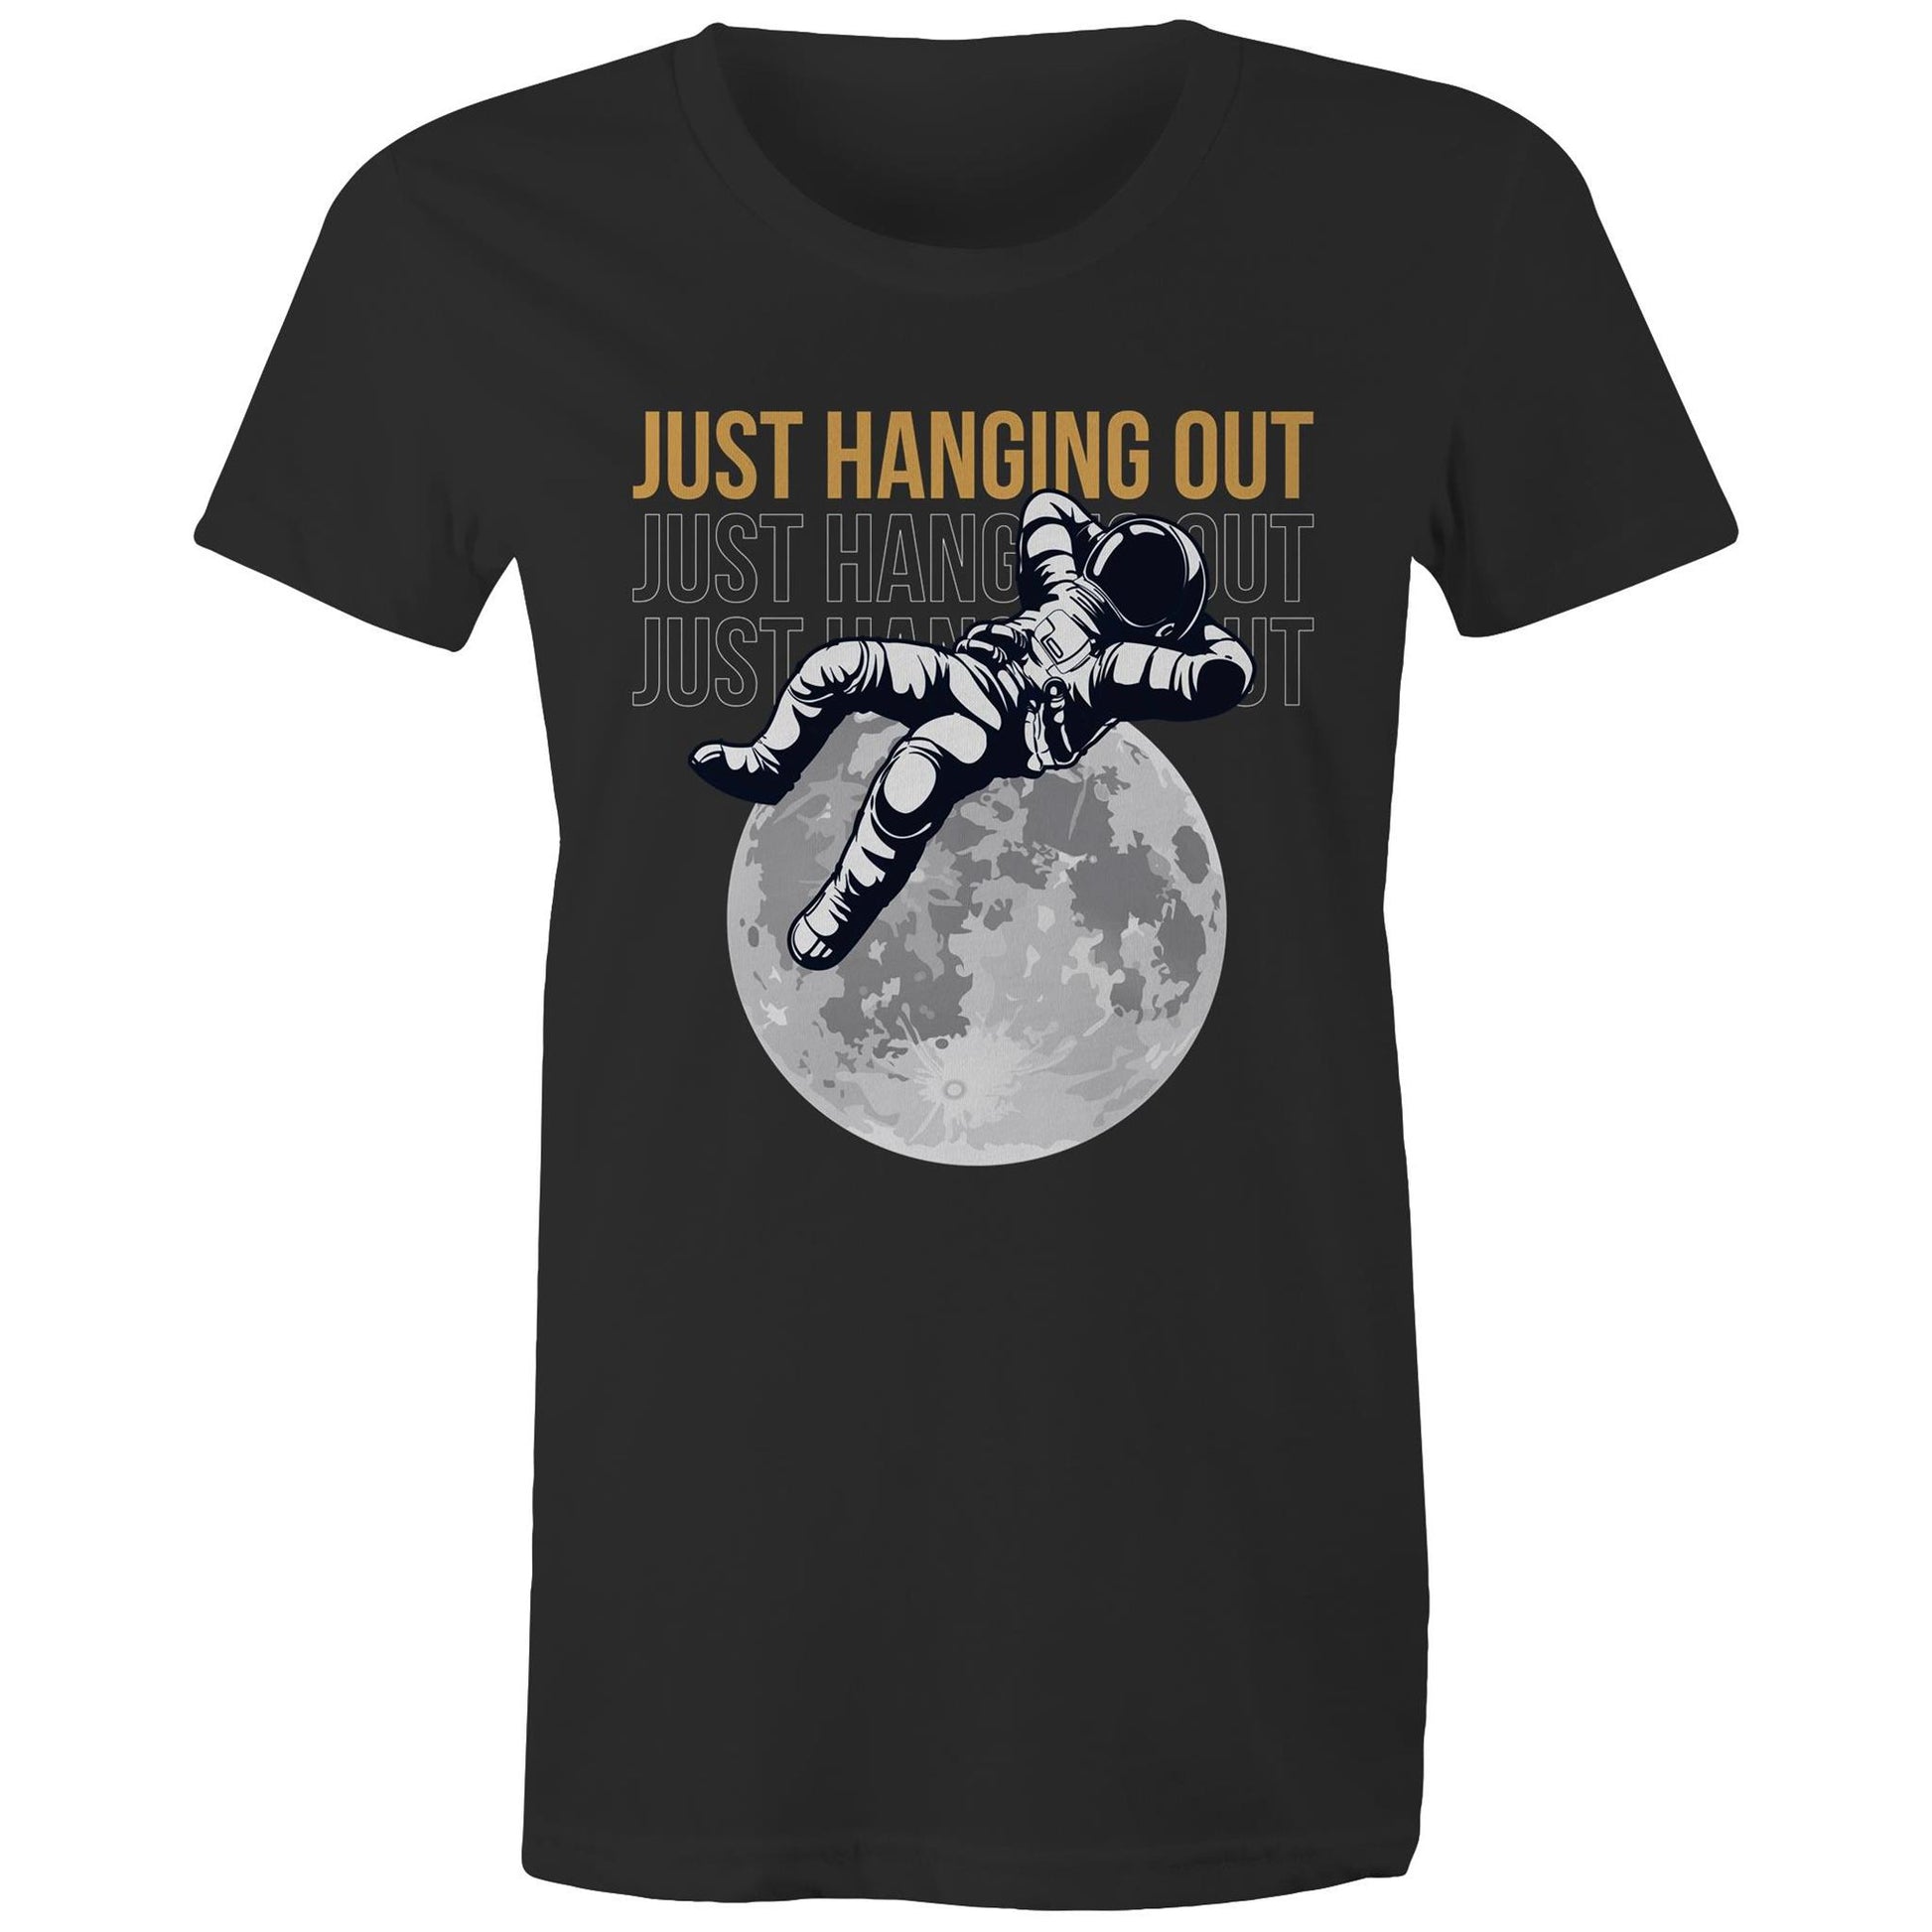 Just Hanging Out - Womens T-shirt Black Womens T-shirt Space